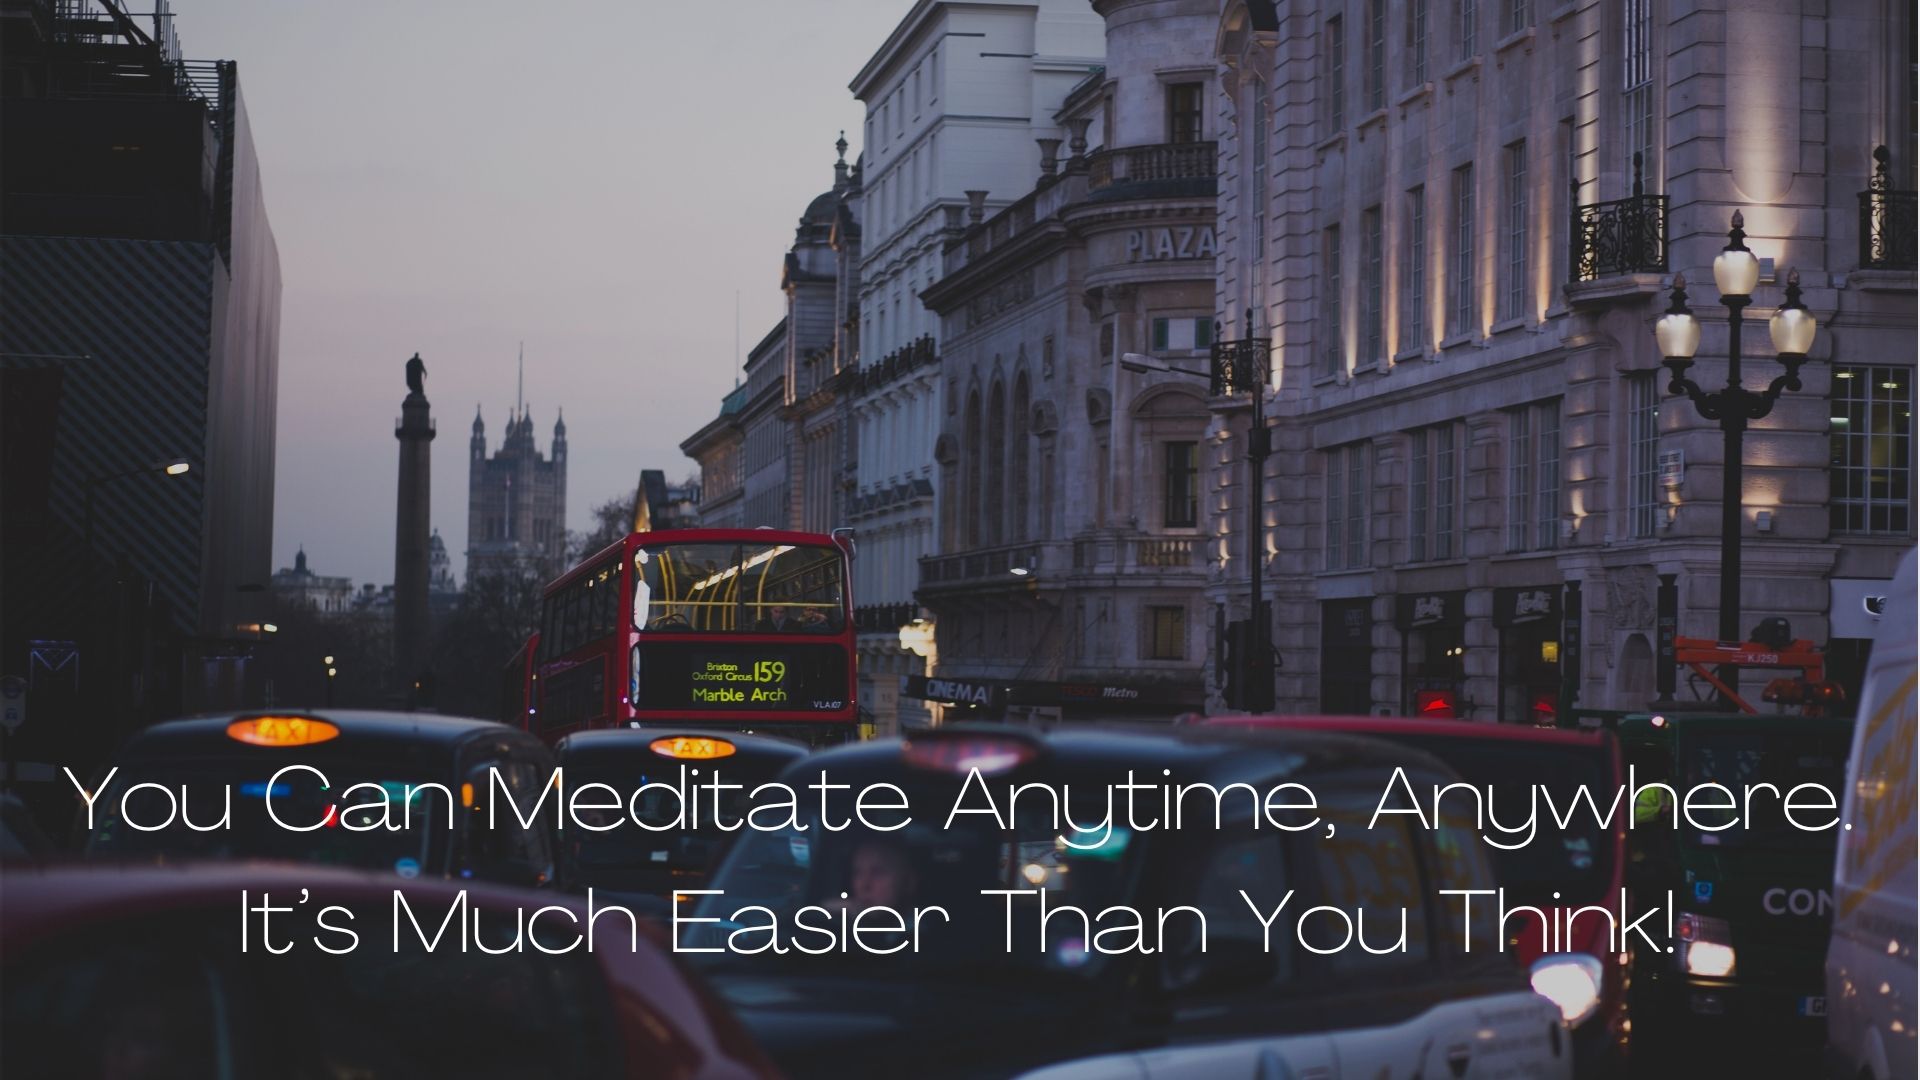 You Can Meditate Anytime, Anywhere. It’s Much Easier Than You Think!